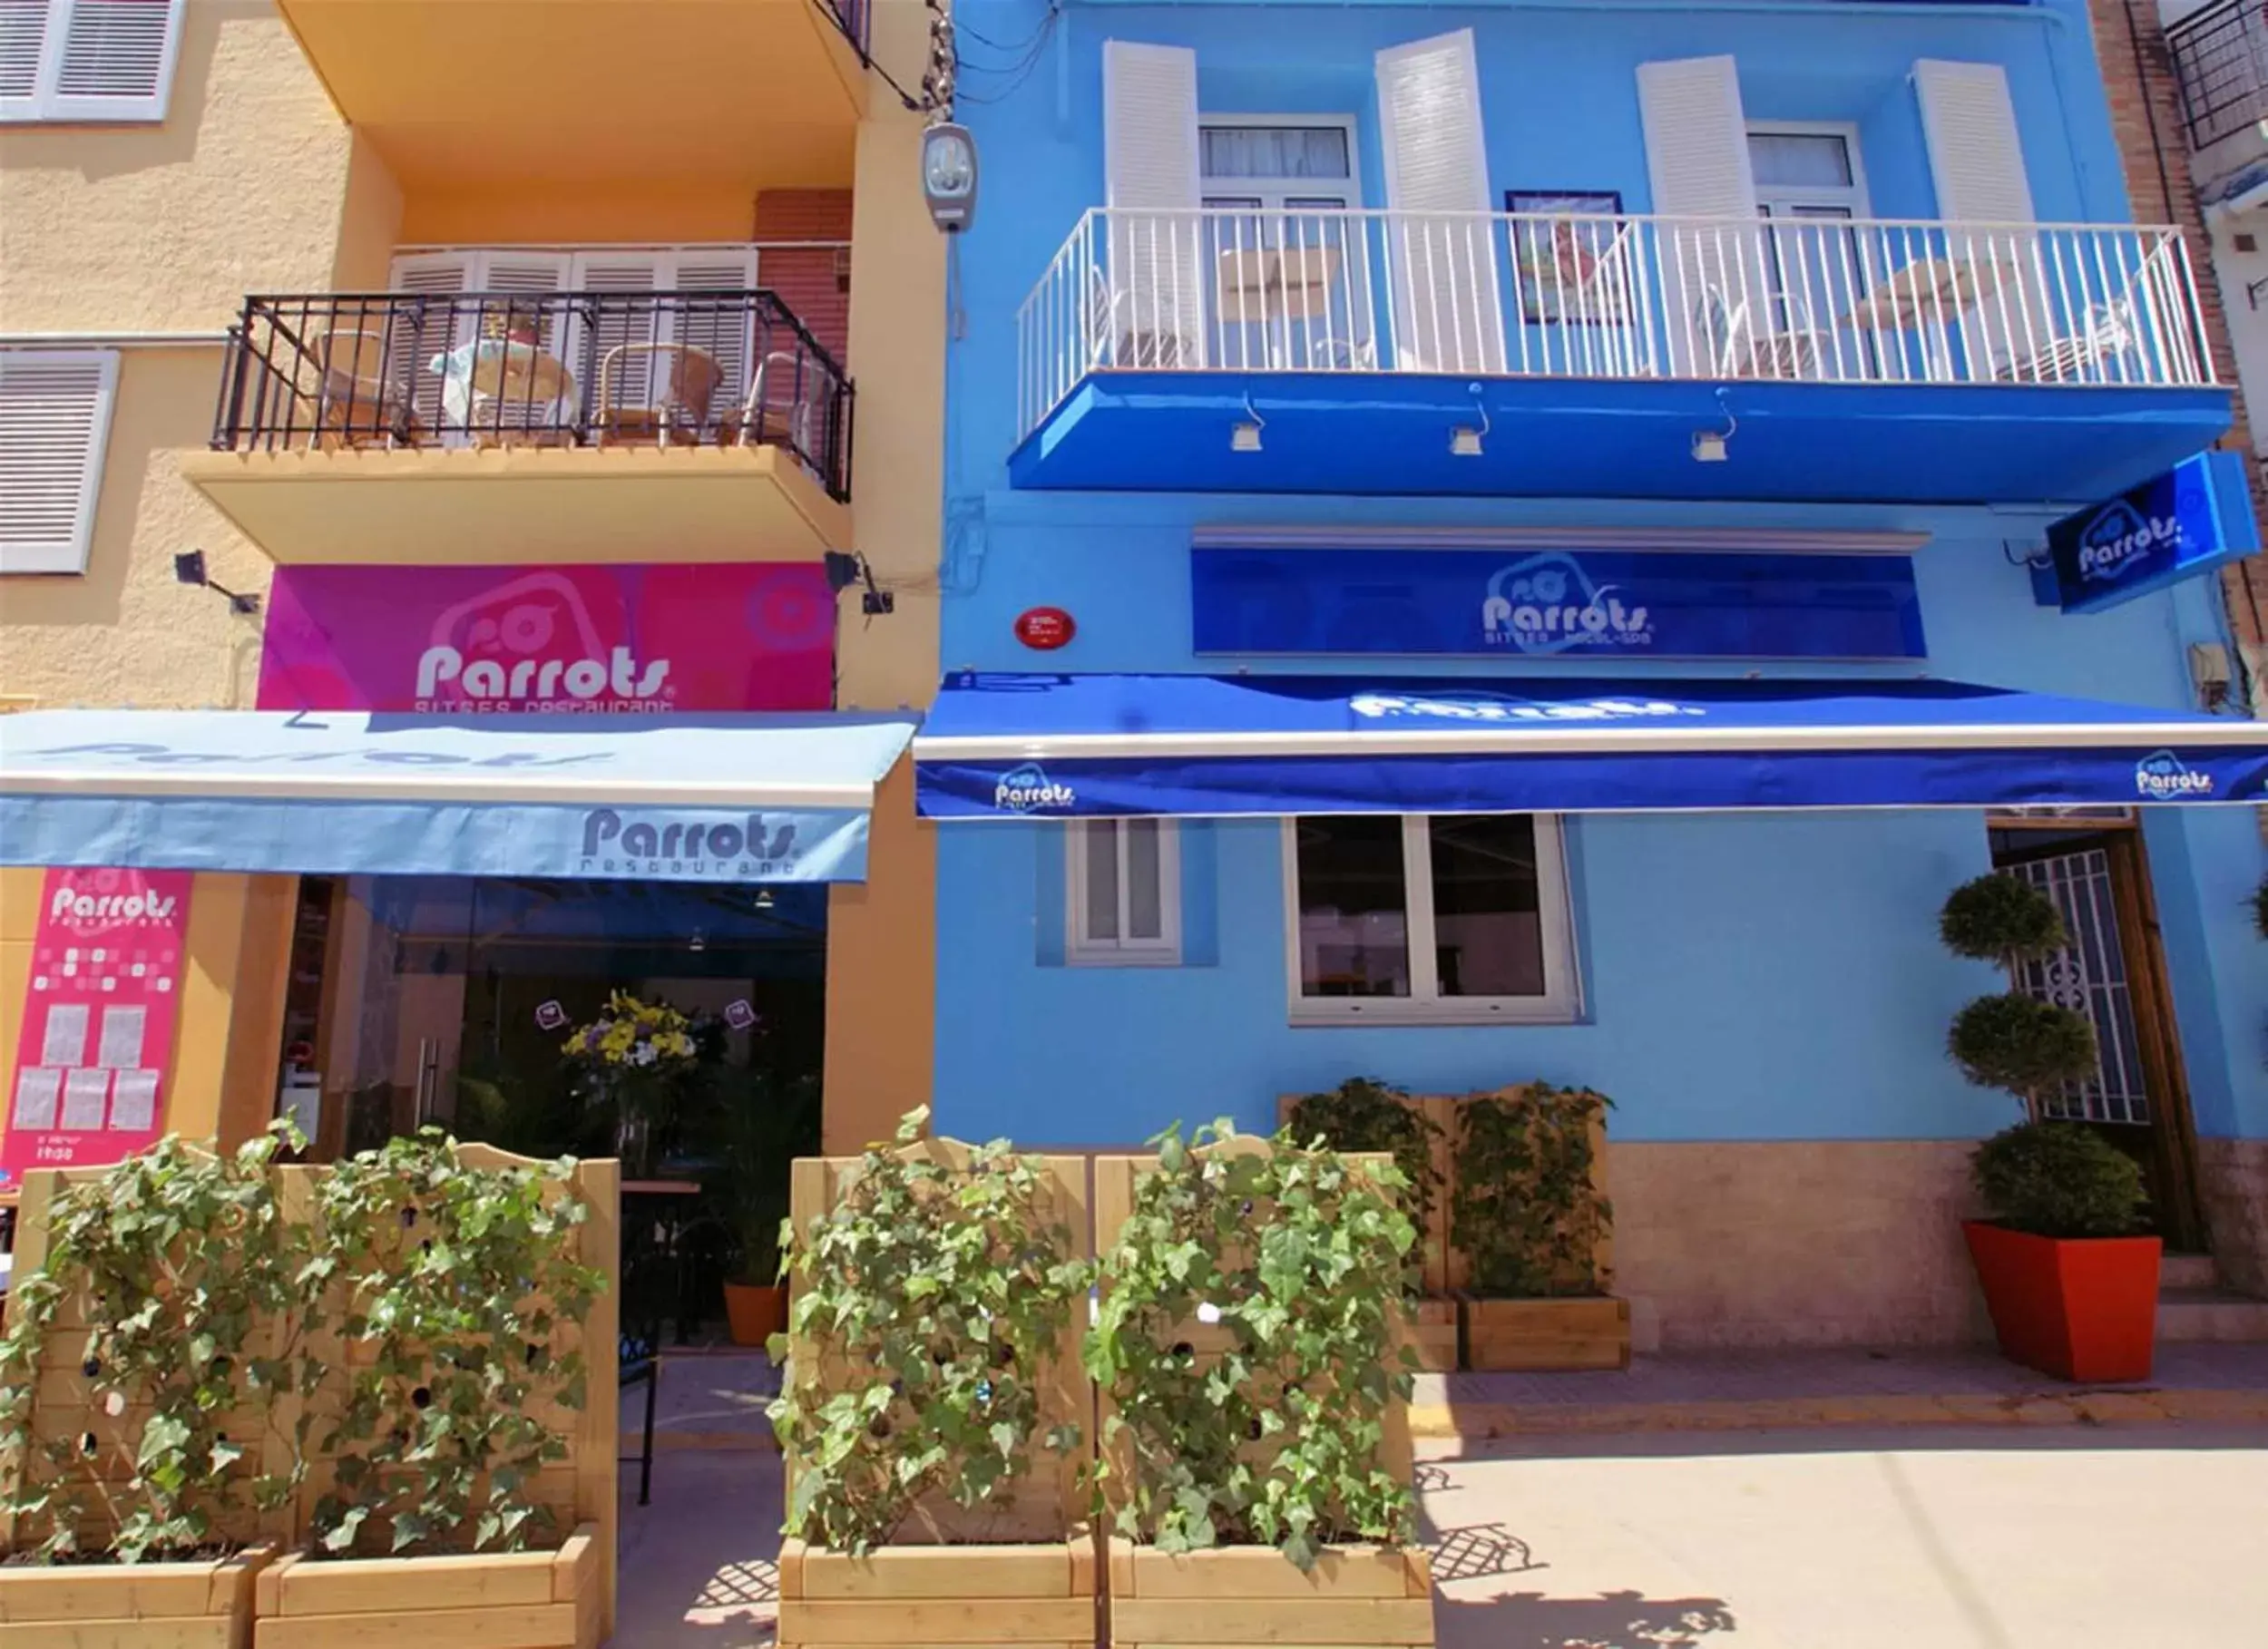 Property Building in Parrots Sitges Hotel